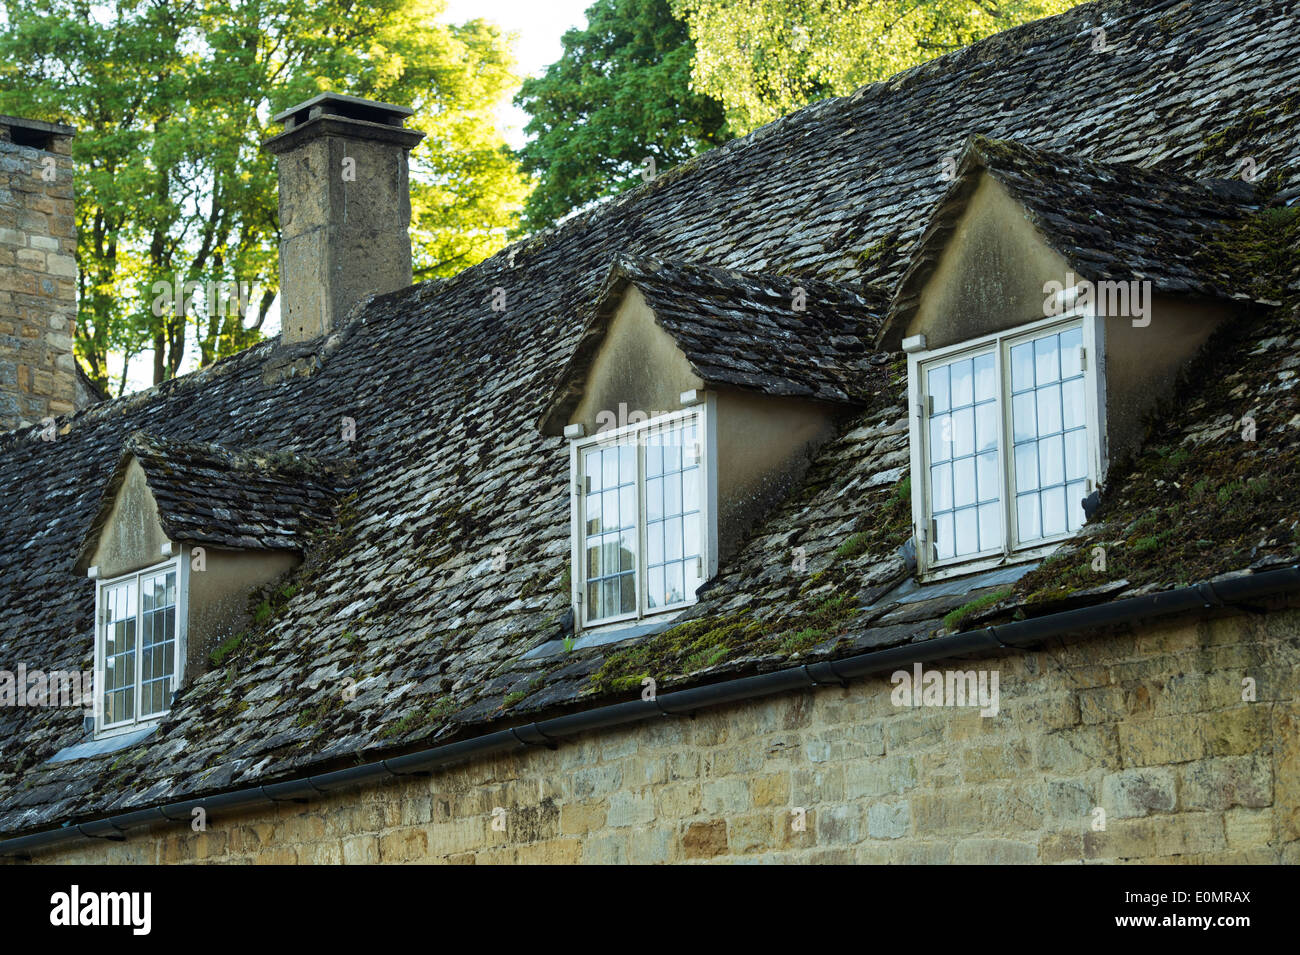 Old Dormer Windows and tiled roof on Cotswold cottages in Snowshill. Cotswolds, Gloucestershire, England Stock Photo